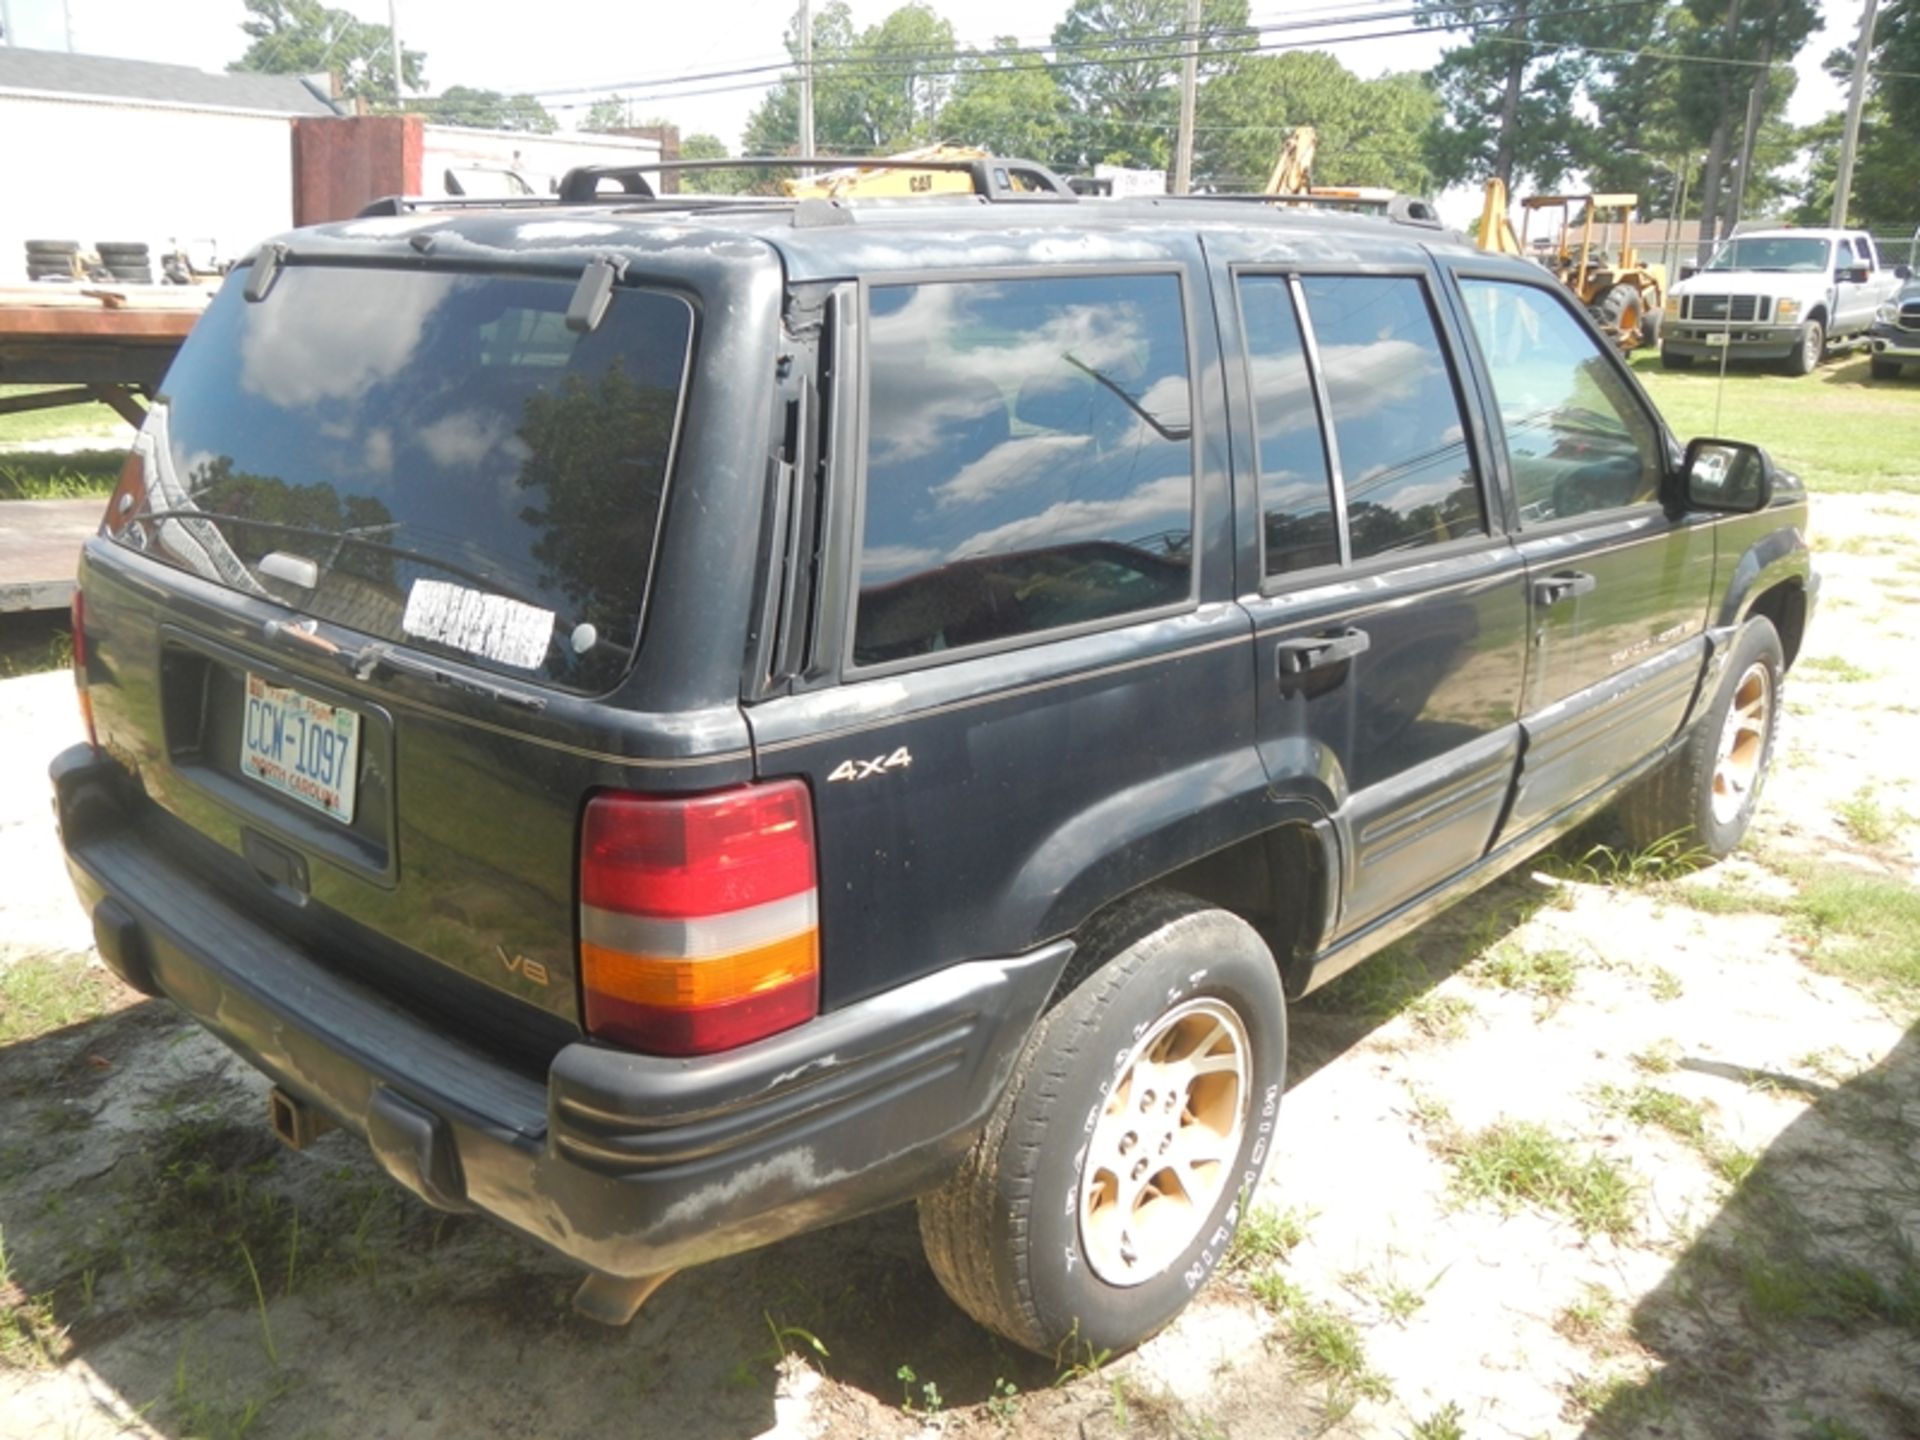 1996 JEEP GRAND CHEROKEE Limited 4WD (not running) VIN 1J4GZ78Y9TC212870 - MILES unknown. VIN - Image 3 of 5